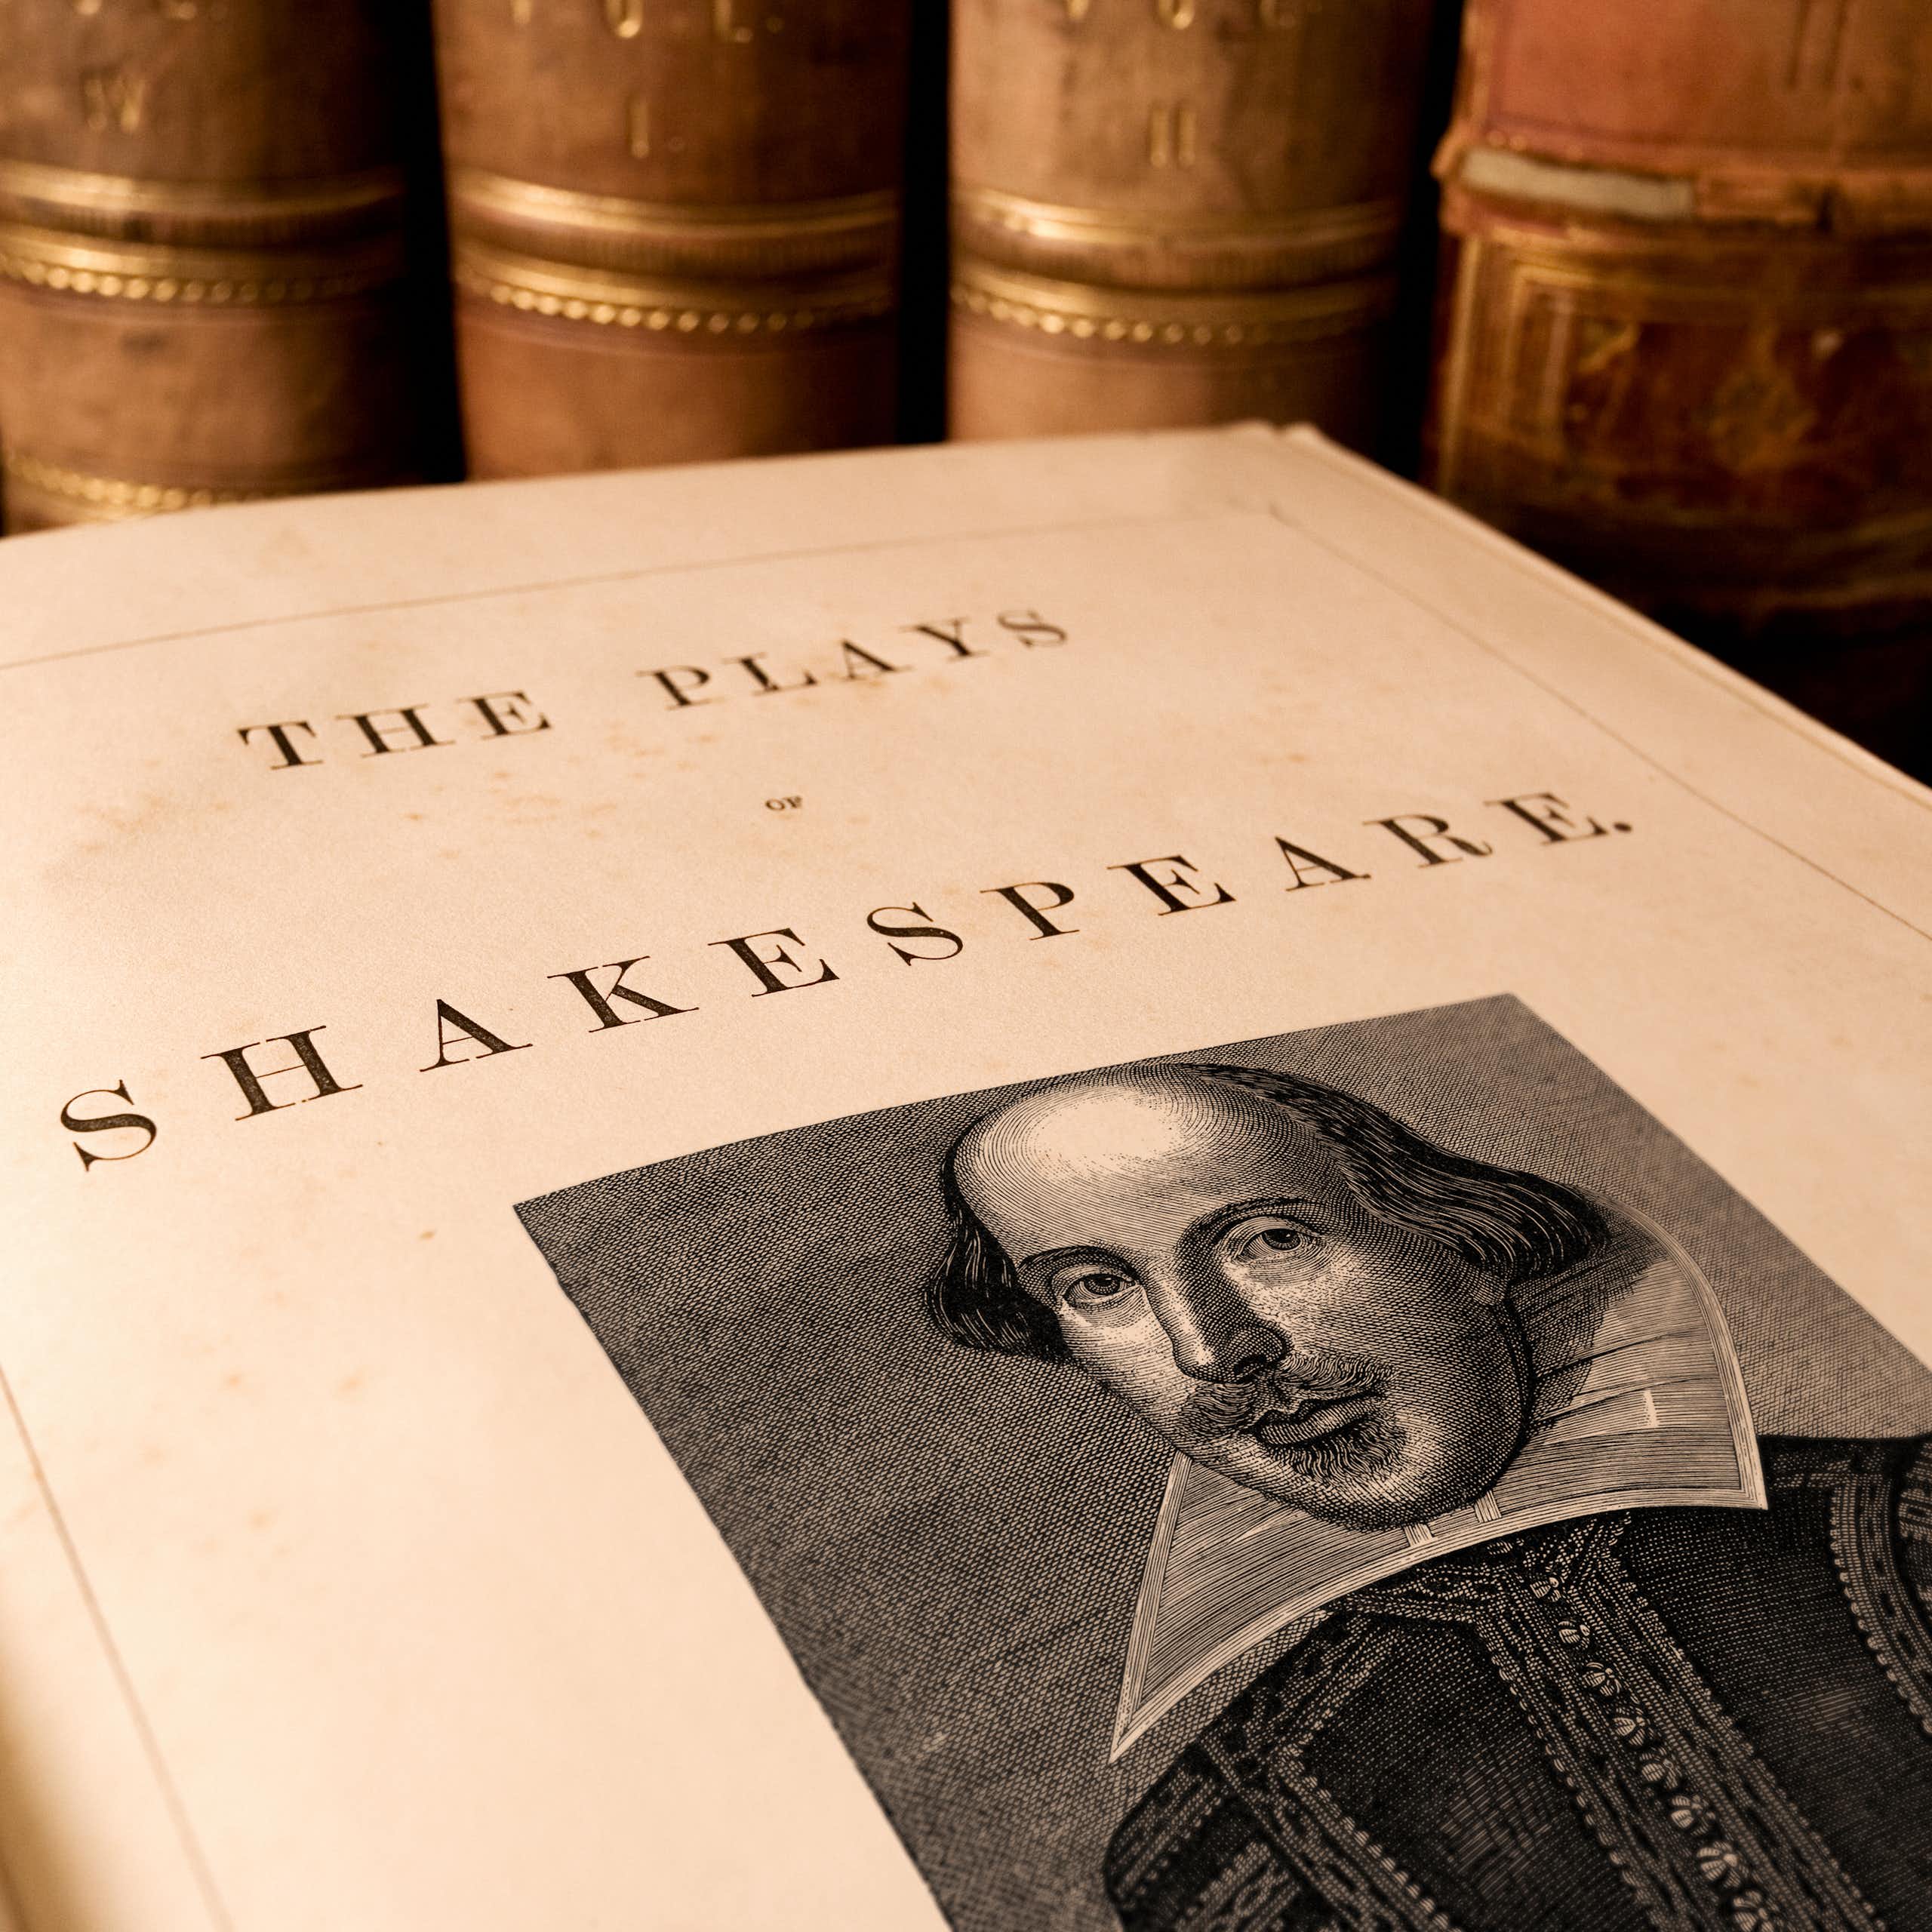 The title page from an antique book of the plays of Shakespeare